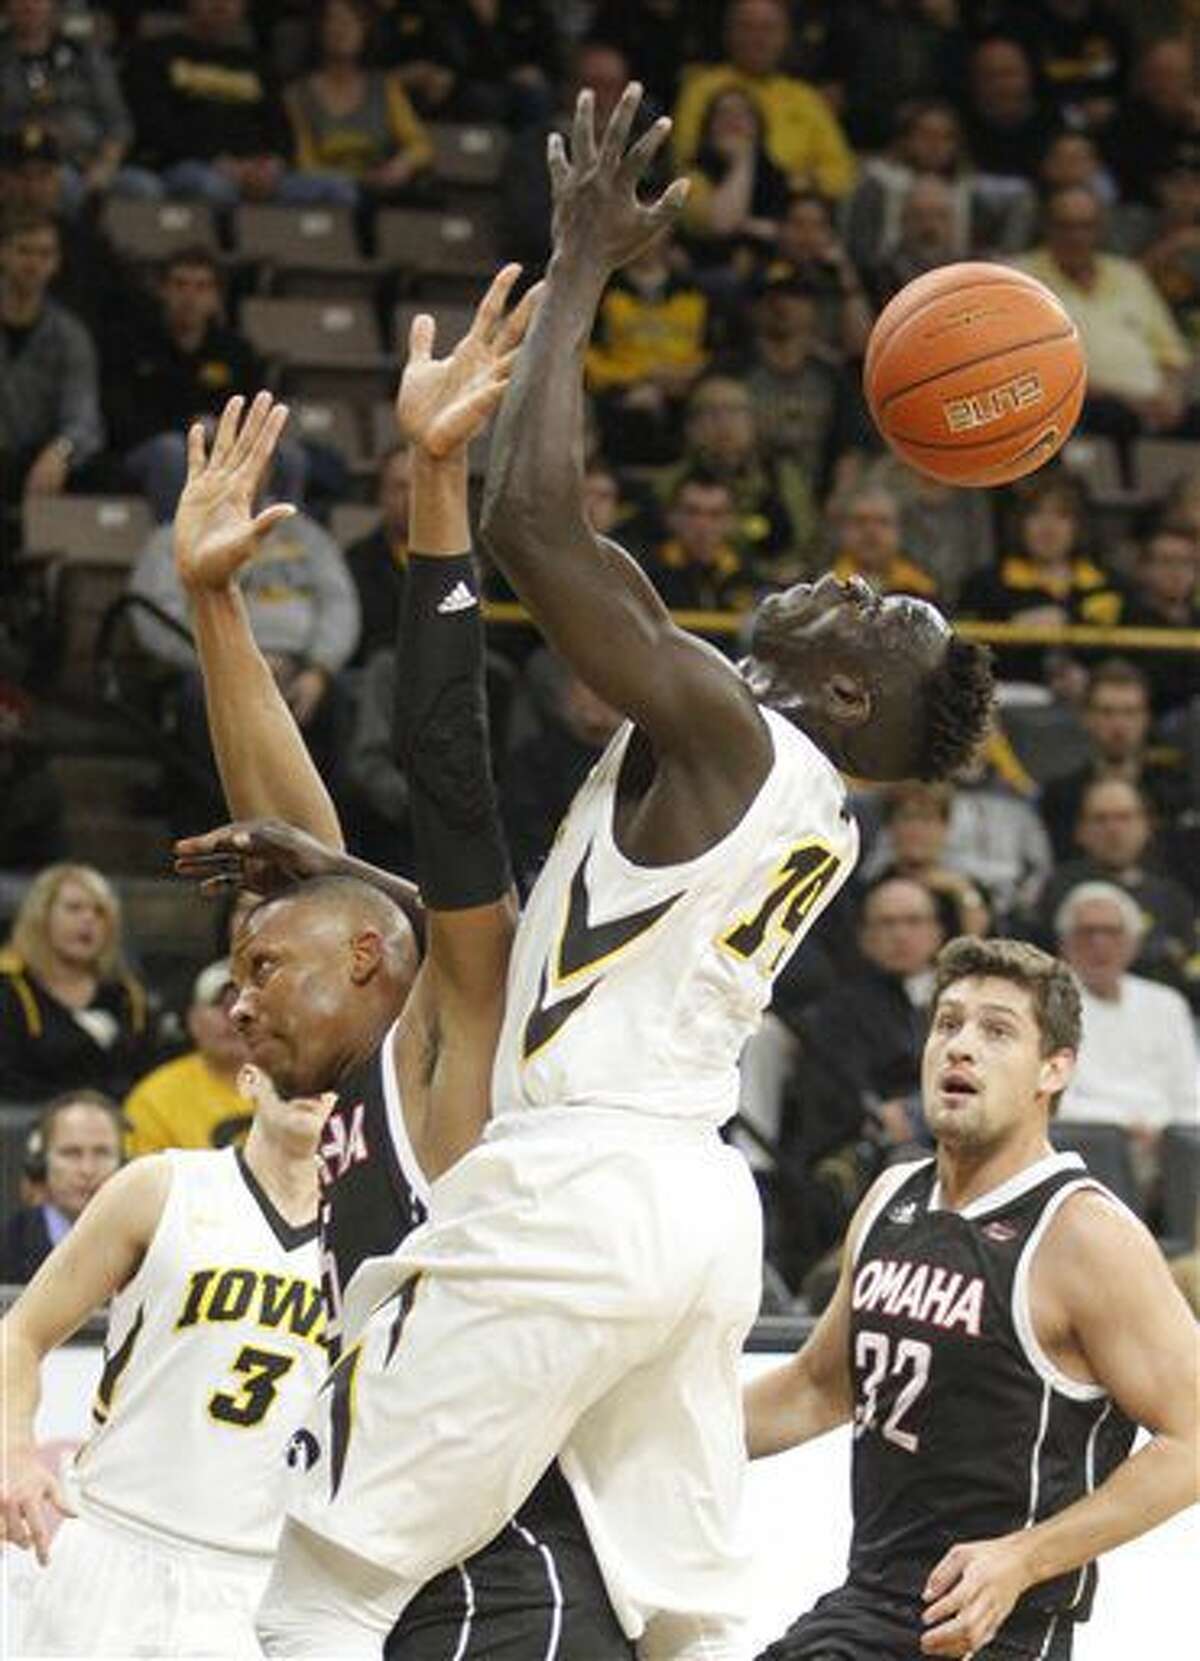 Iowa's Peter Jok (14) is fouled by Omaha's Tre'Shawn Thurman (15) during the first half of an NCAA college basketball game, Saturday, Dec. 3, 2016, in Iowa City, Iowa. (AP Photo/Matthew Holst)